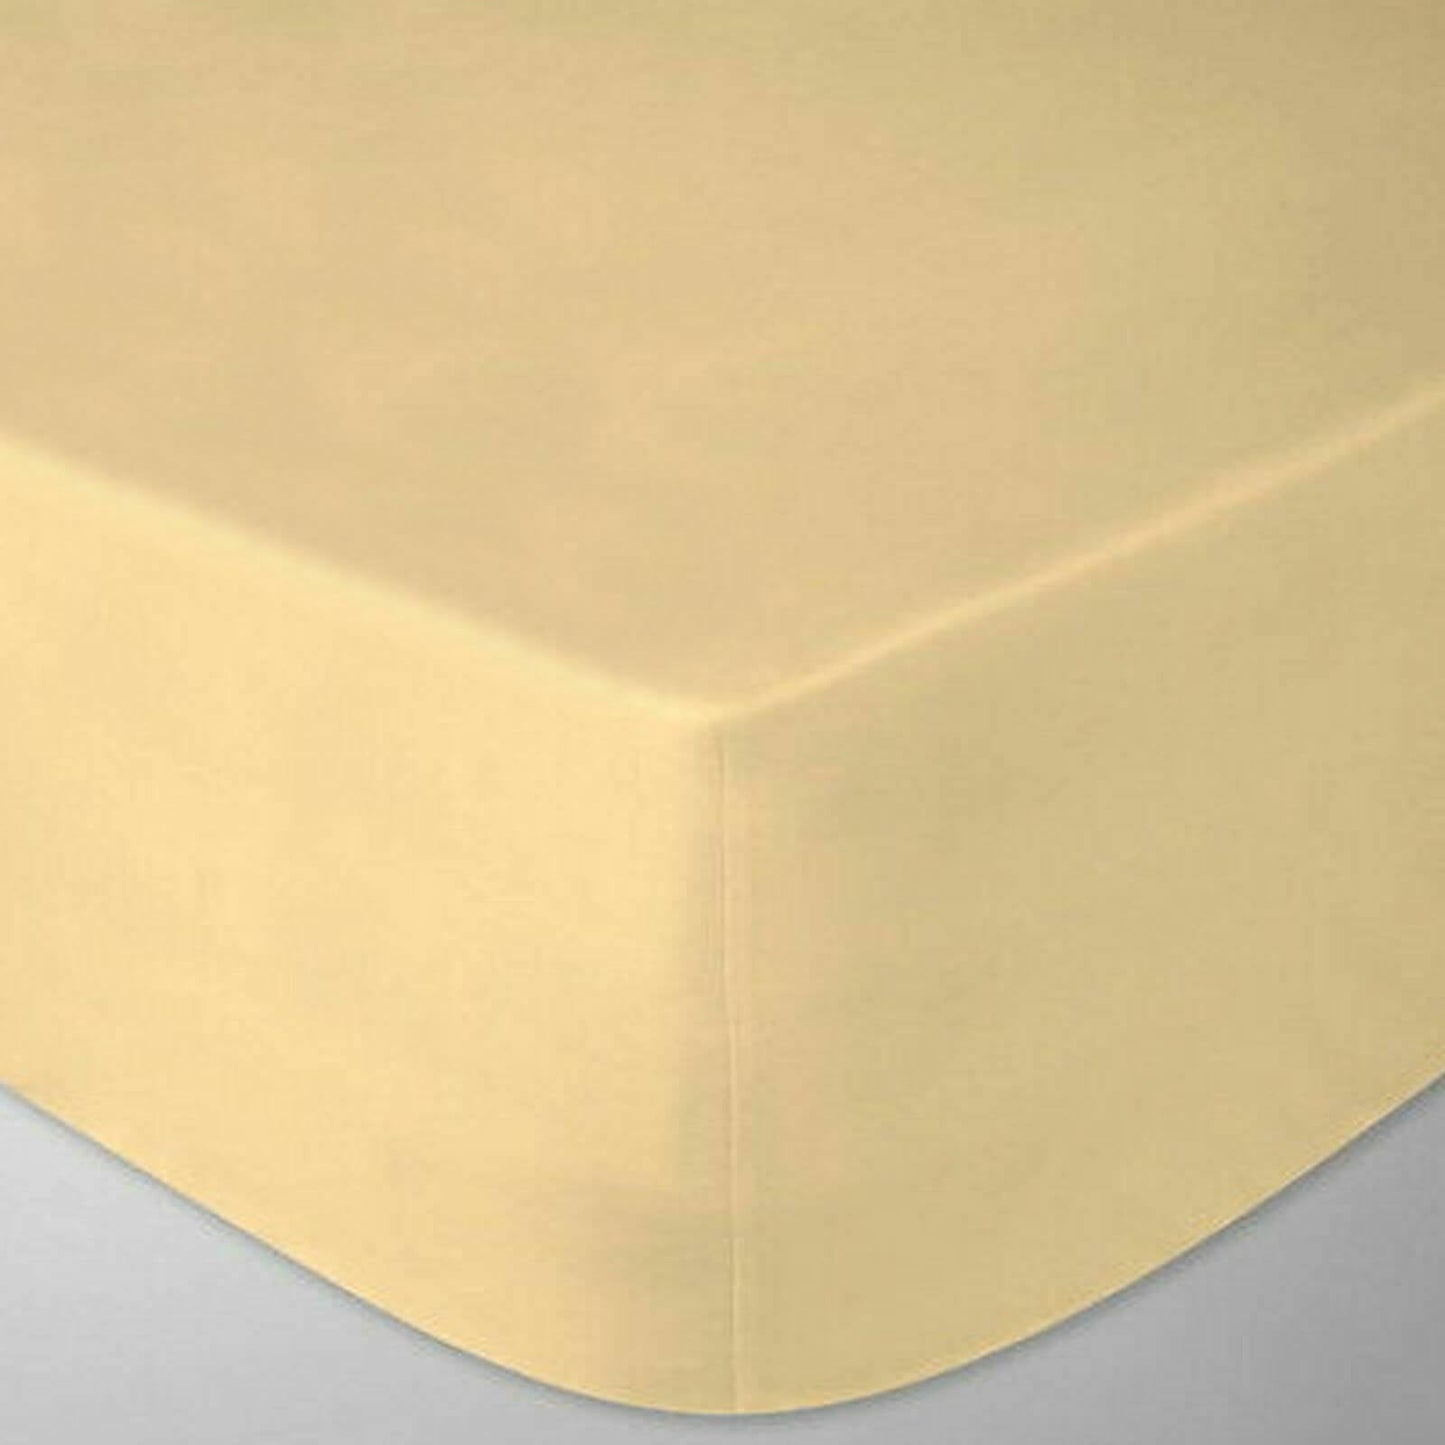 Egyptian Percale Hotel Quality 200 Thread Count Fitted Bed Sheet - TheComfortshop.co.ukBed Sheets0721718962359thecomfortshopTheComfortshop.co.ukLatte T200 Fitted Sheet Super KingLatteSuperkingEgyptian Percale Hotel Quality 200 Thread Count Fitted Bed Sheet - TheComfortshop.co.uk